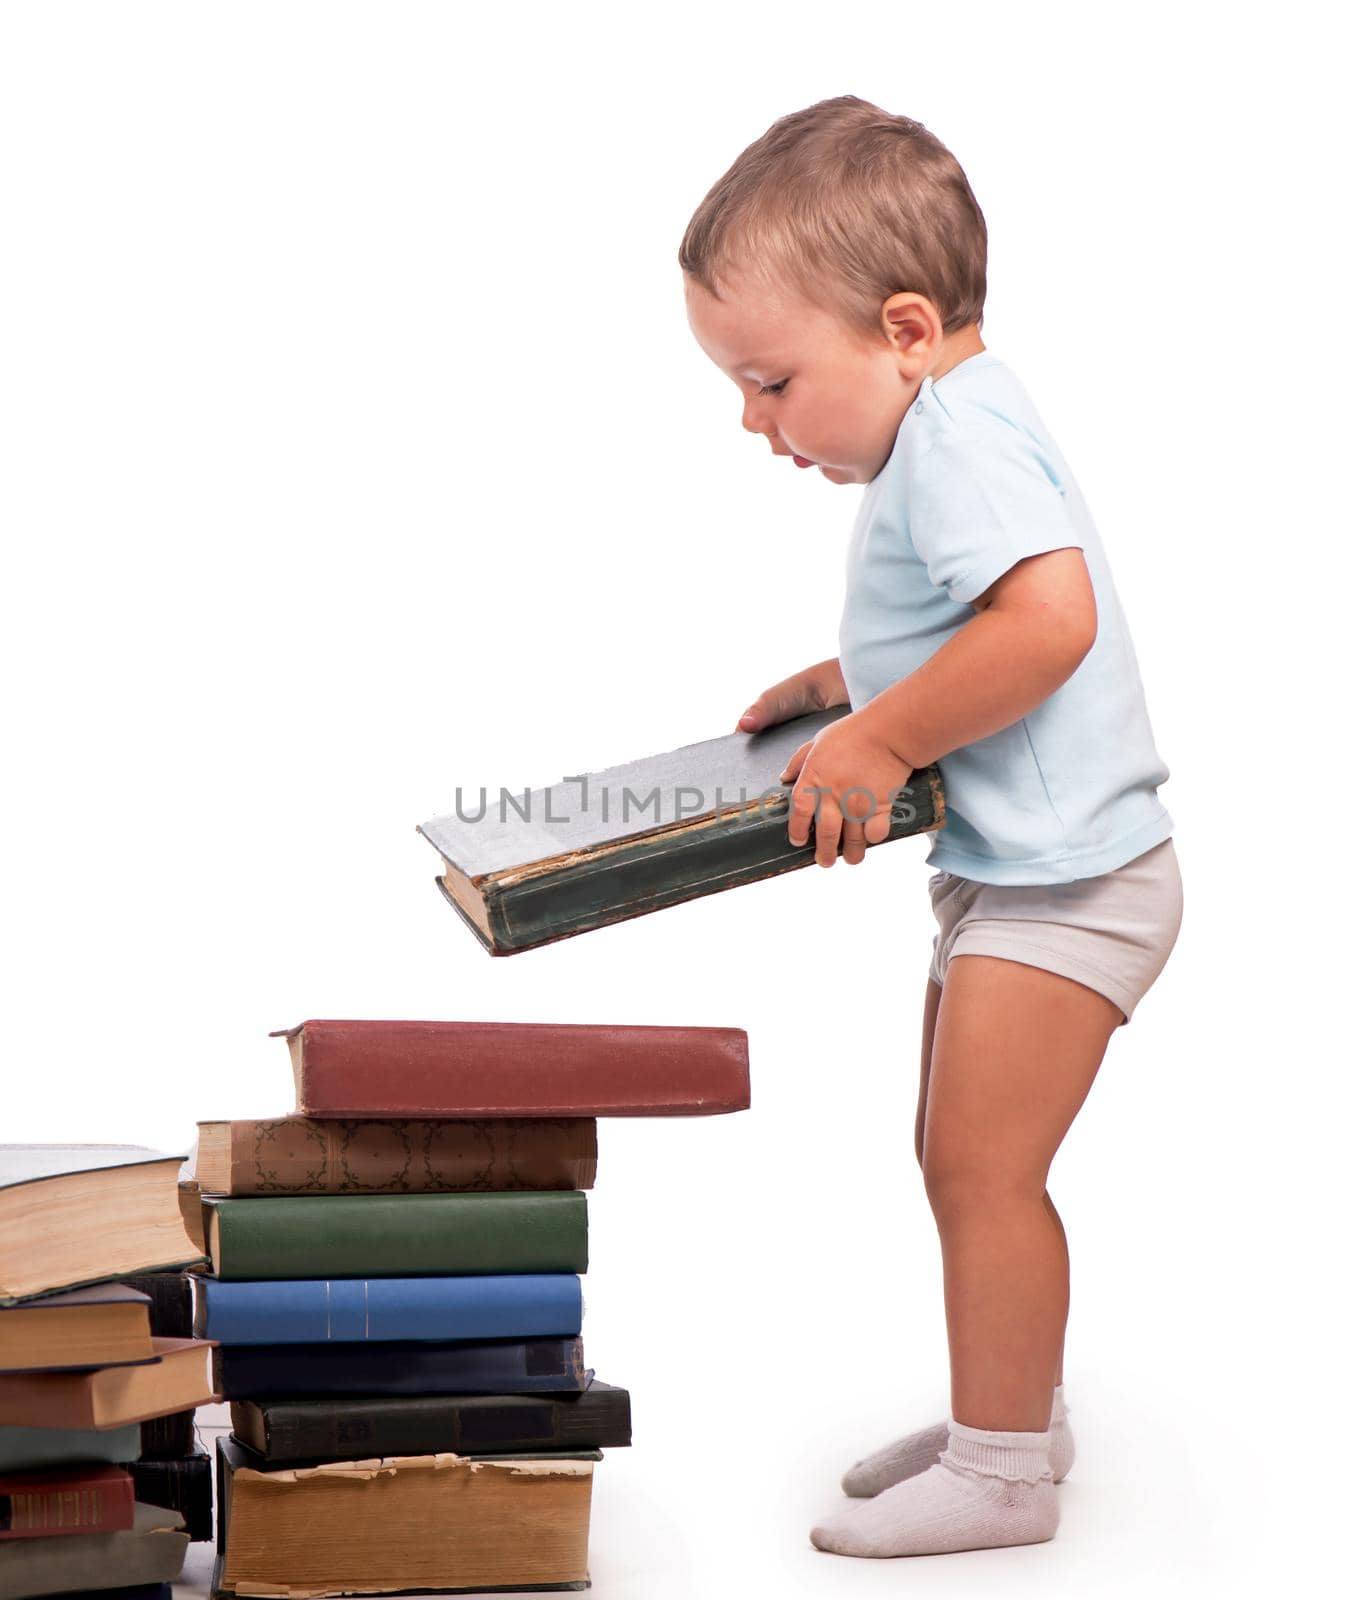 Boy stands near a stack of books for an educational portrait - isolated over white